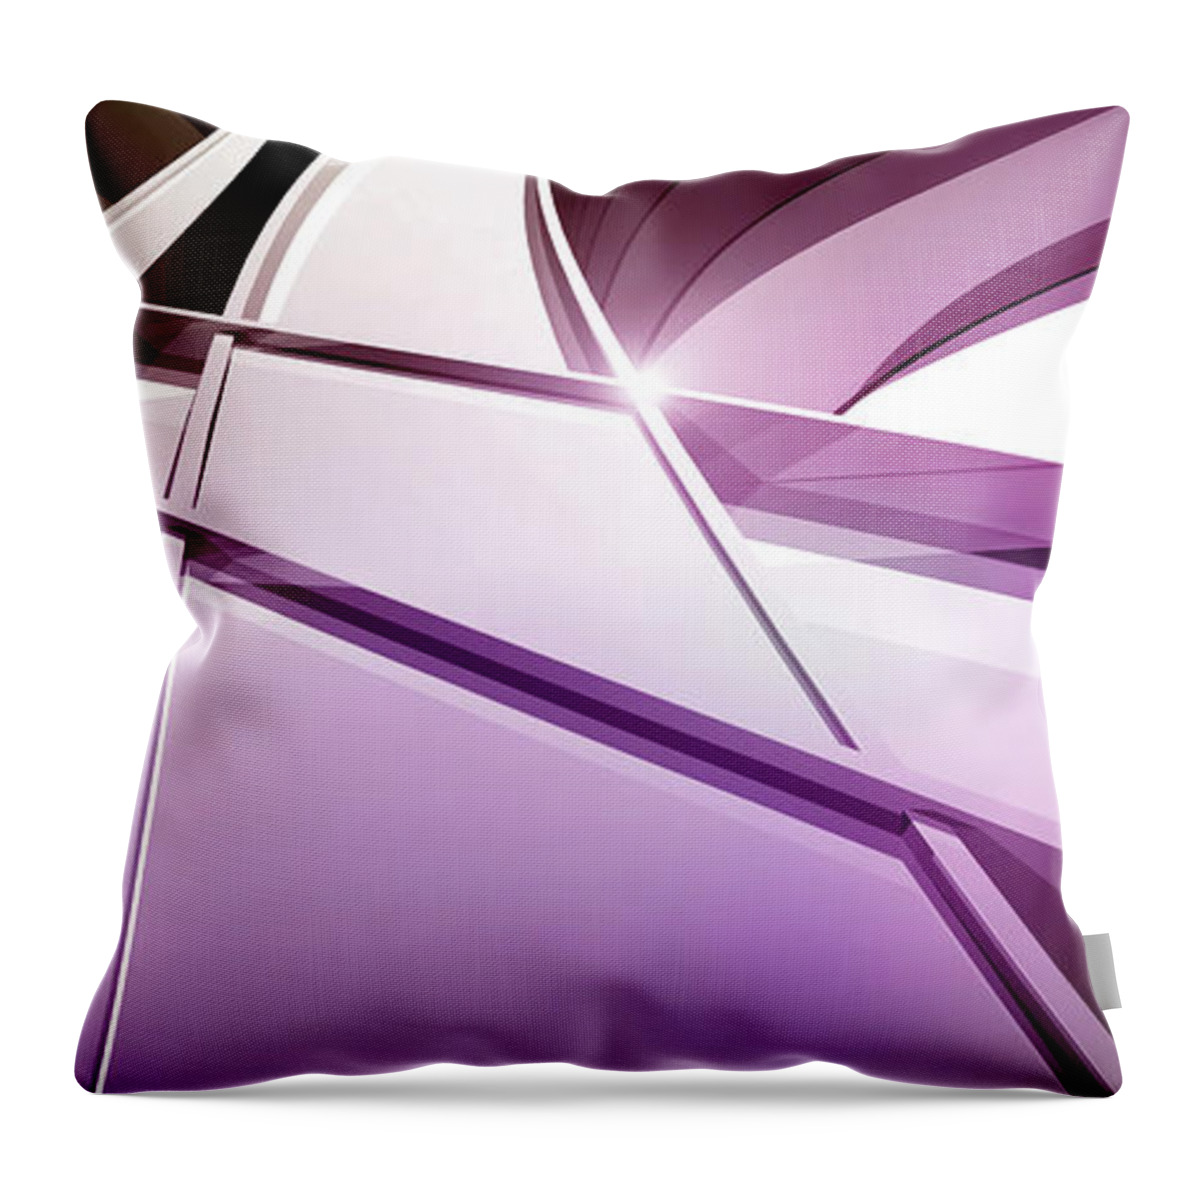 Curve Throw Pillow featuring the digital art Intersecting Three-dimensional Lines In by Ralf Hiemisch